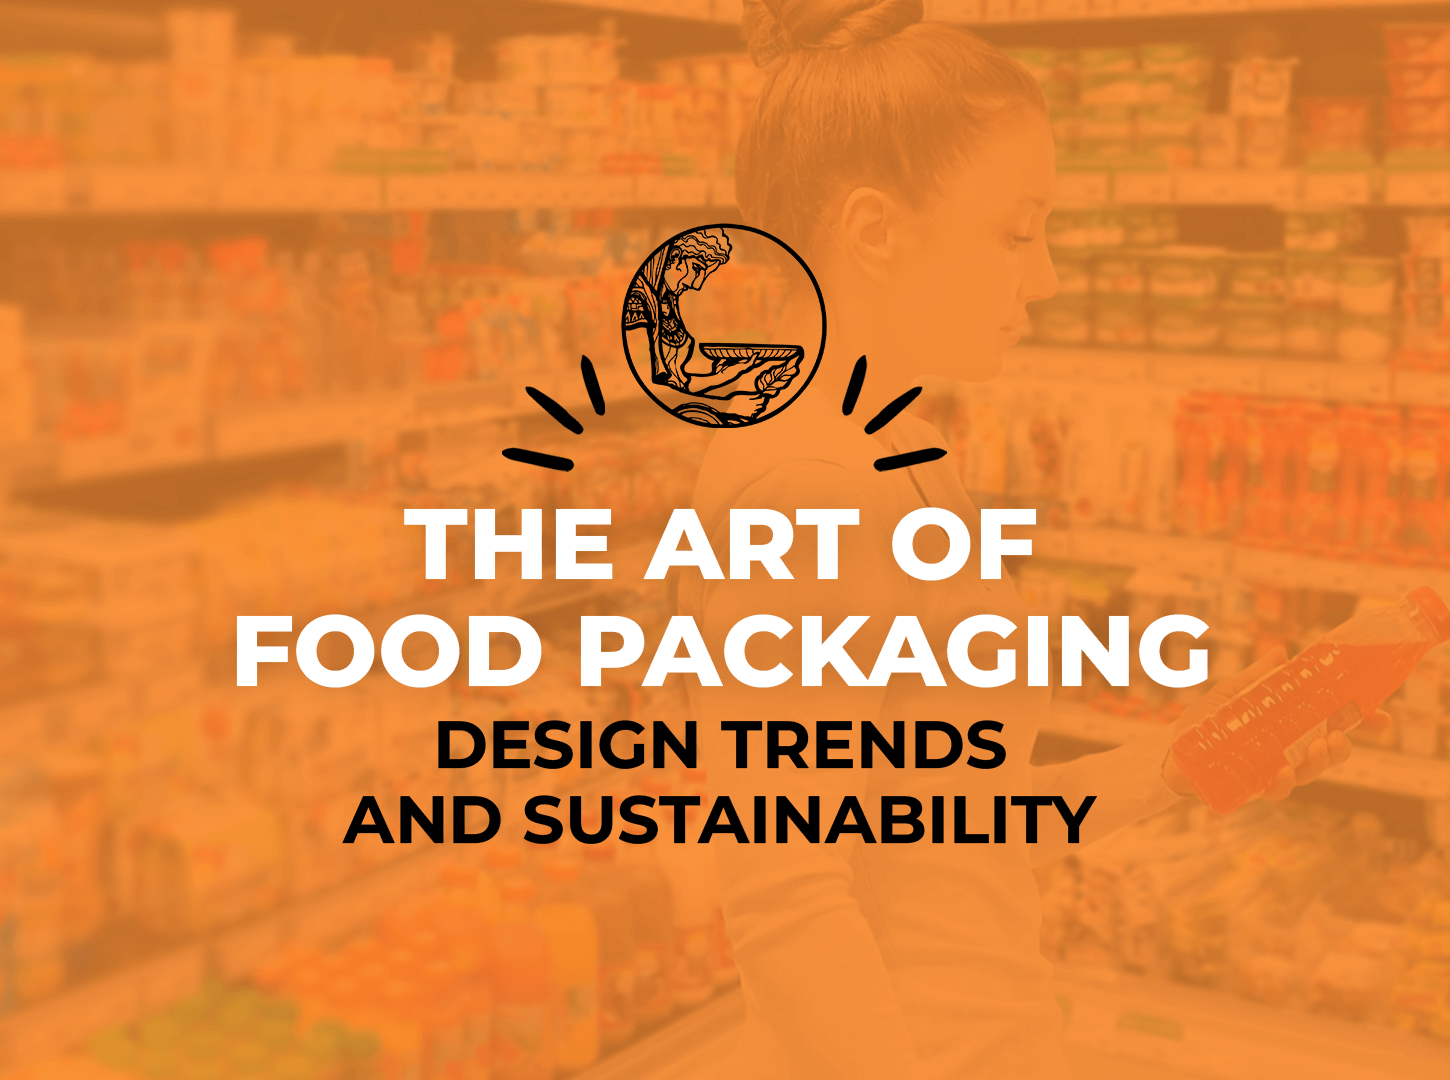 Featured image for “The Art of Food Packaging: Design Trends and Sustainability”